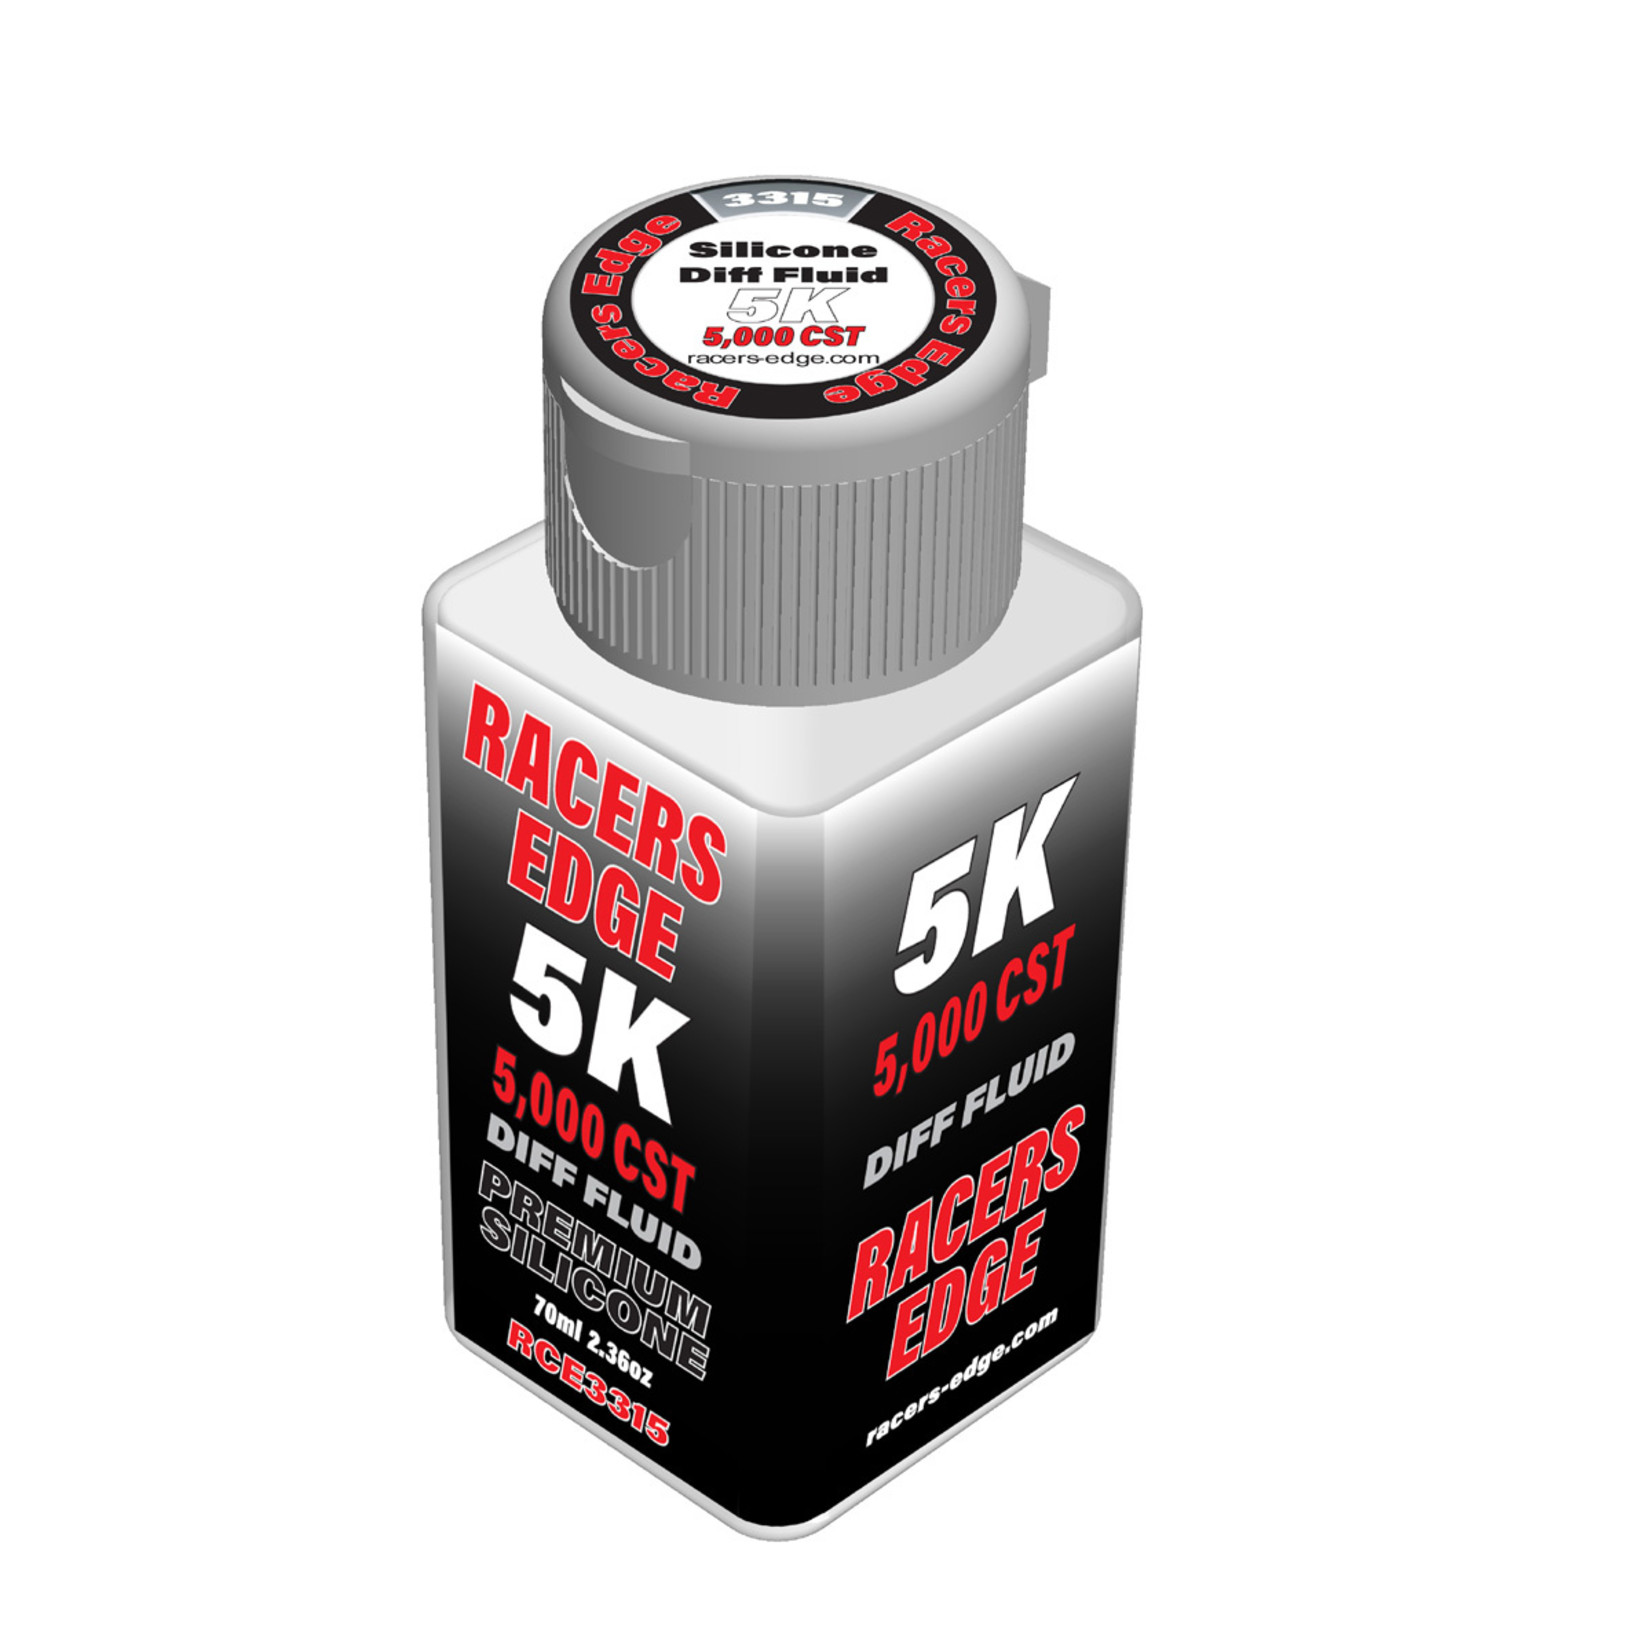 Racers Edge RCE3315 - 5,000cSt 70ml 2.36oz Pure Silicone Diff Fluid